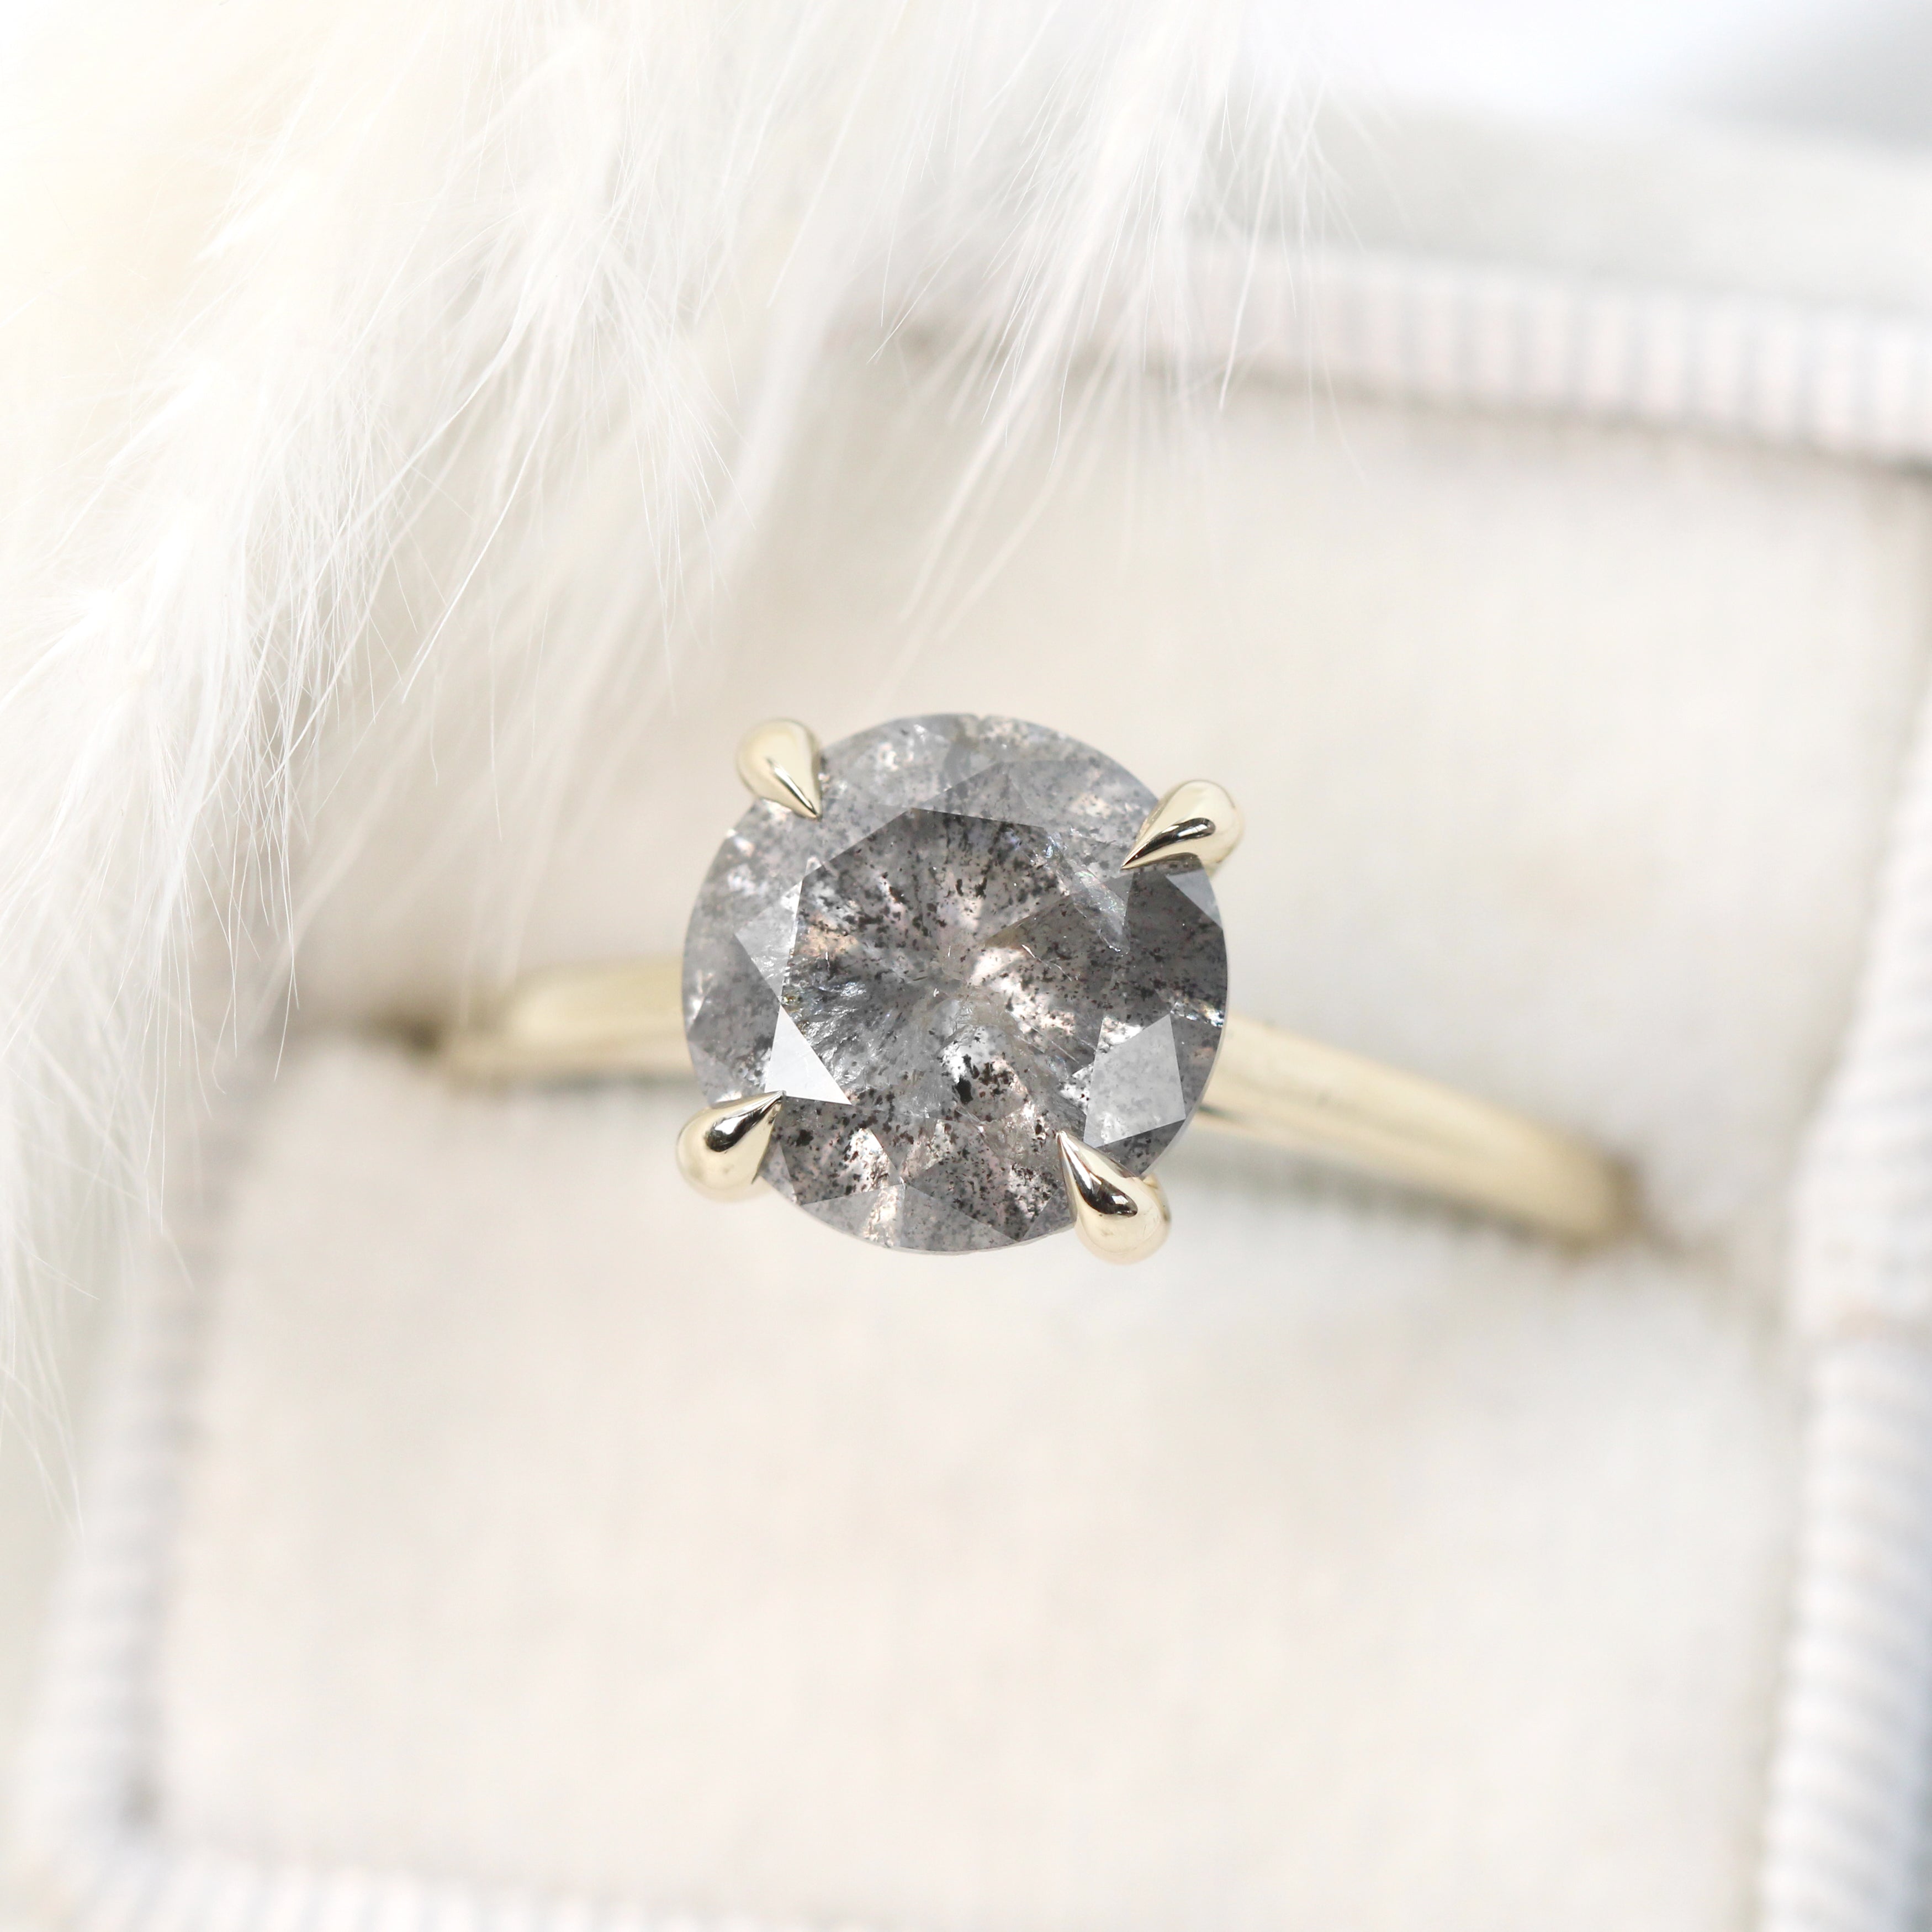 Elle Ring with a 3.02 Carat Round Dark Gray Celestial Diamond in 14k Yellow Gold - Ready to Size and Ship - Midwinter Co. Alternative Bridal Rings and Modern Fine Jewelry